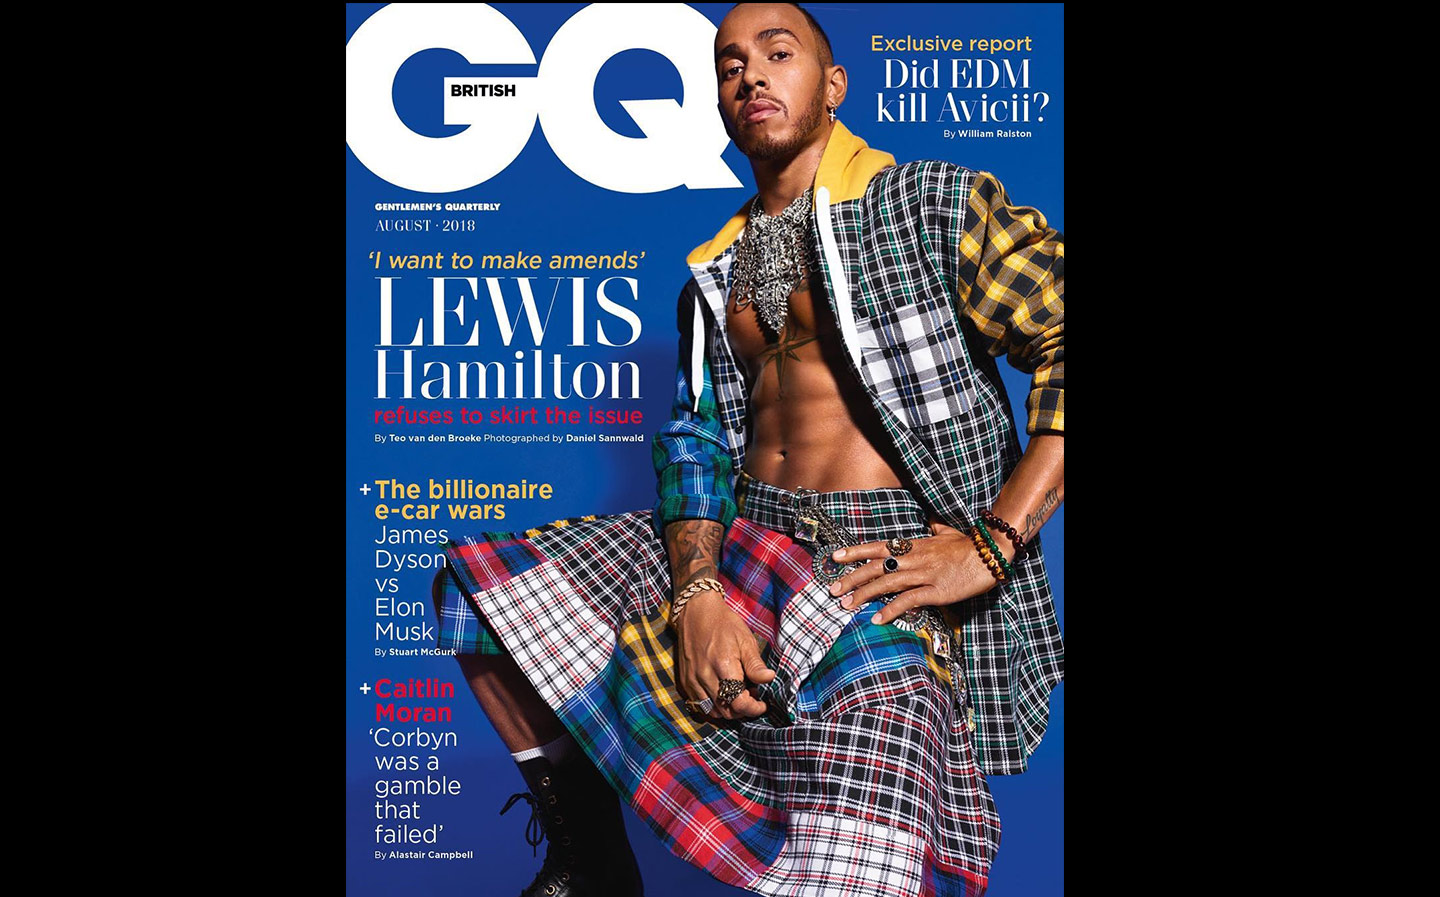 Lewis Hamilton wears kilt for GQ cover to 'make amends' for mocking nephew for wearing dress